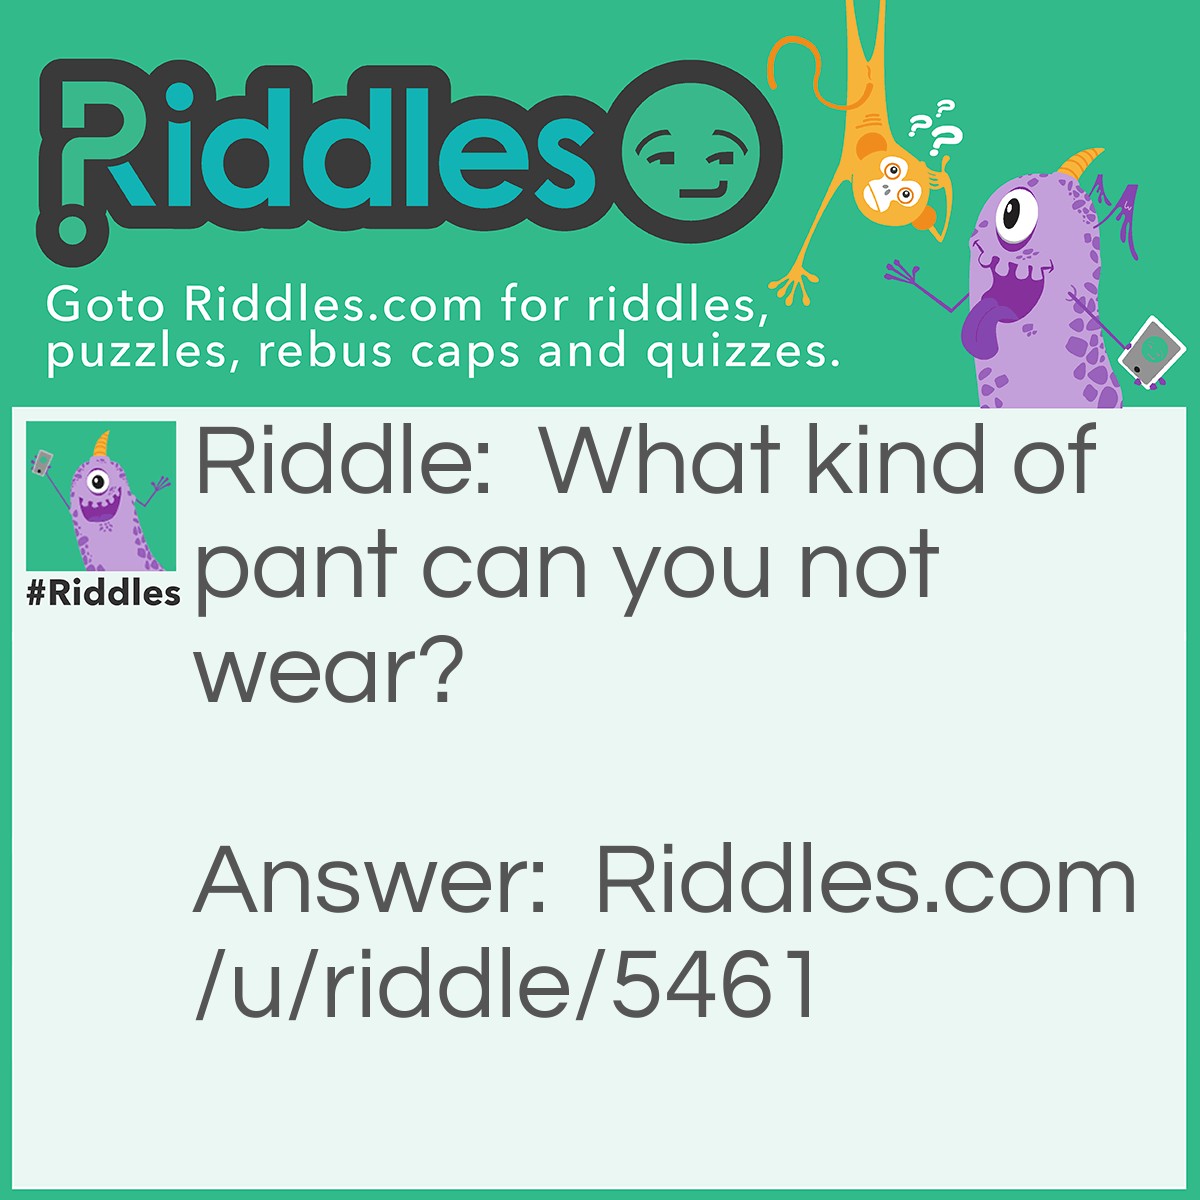 Riddle: What kind of pant can you not wear? Answer: A pantry!